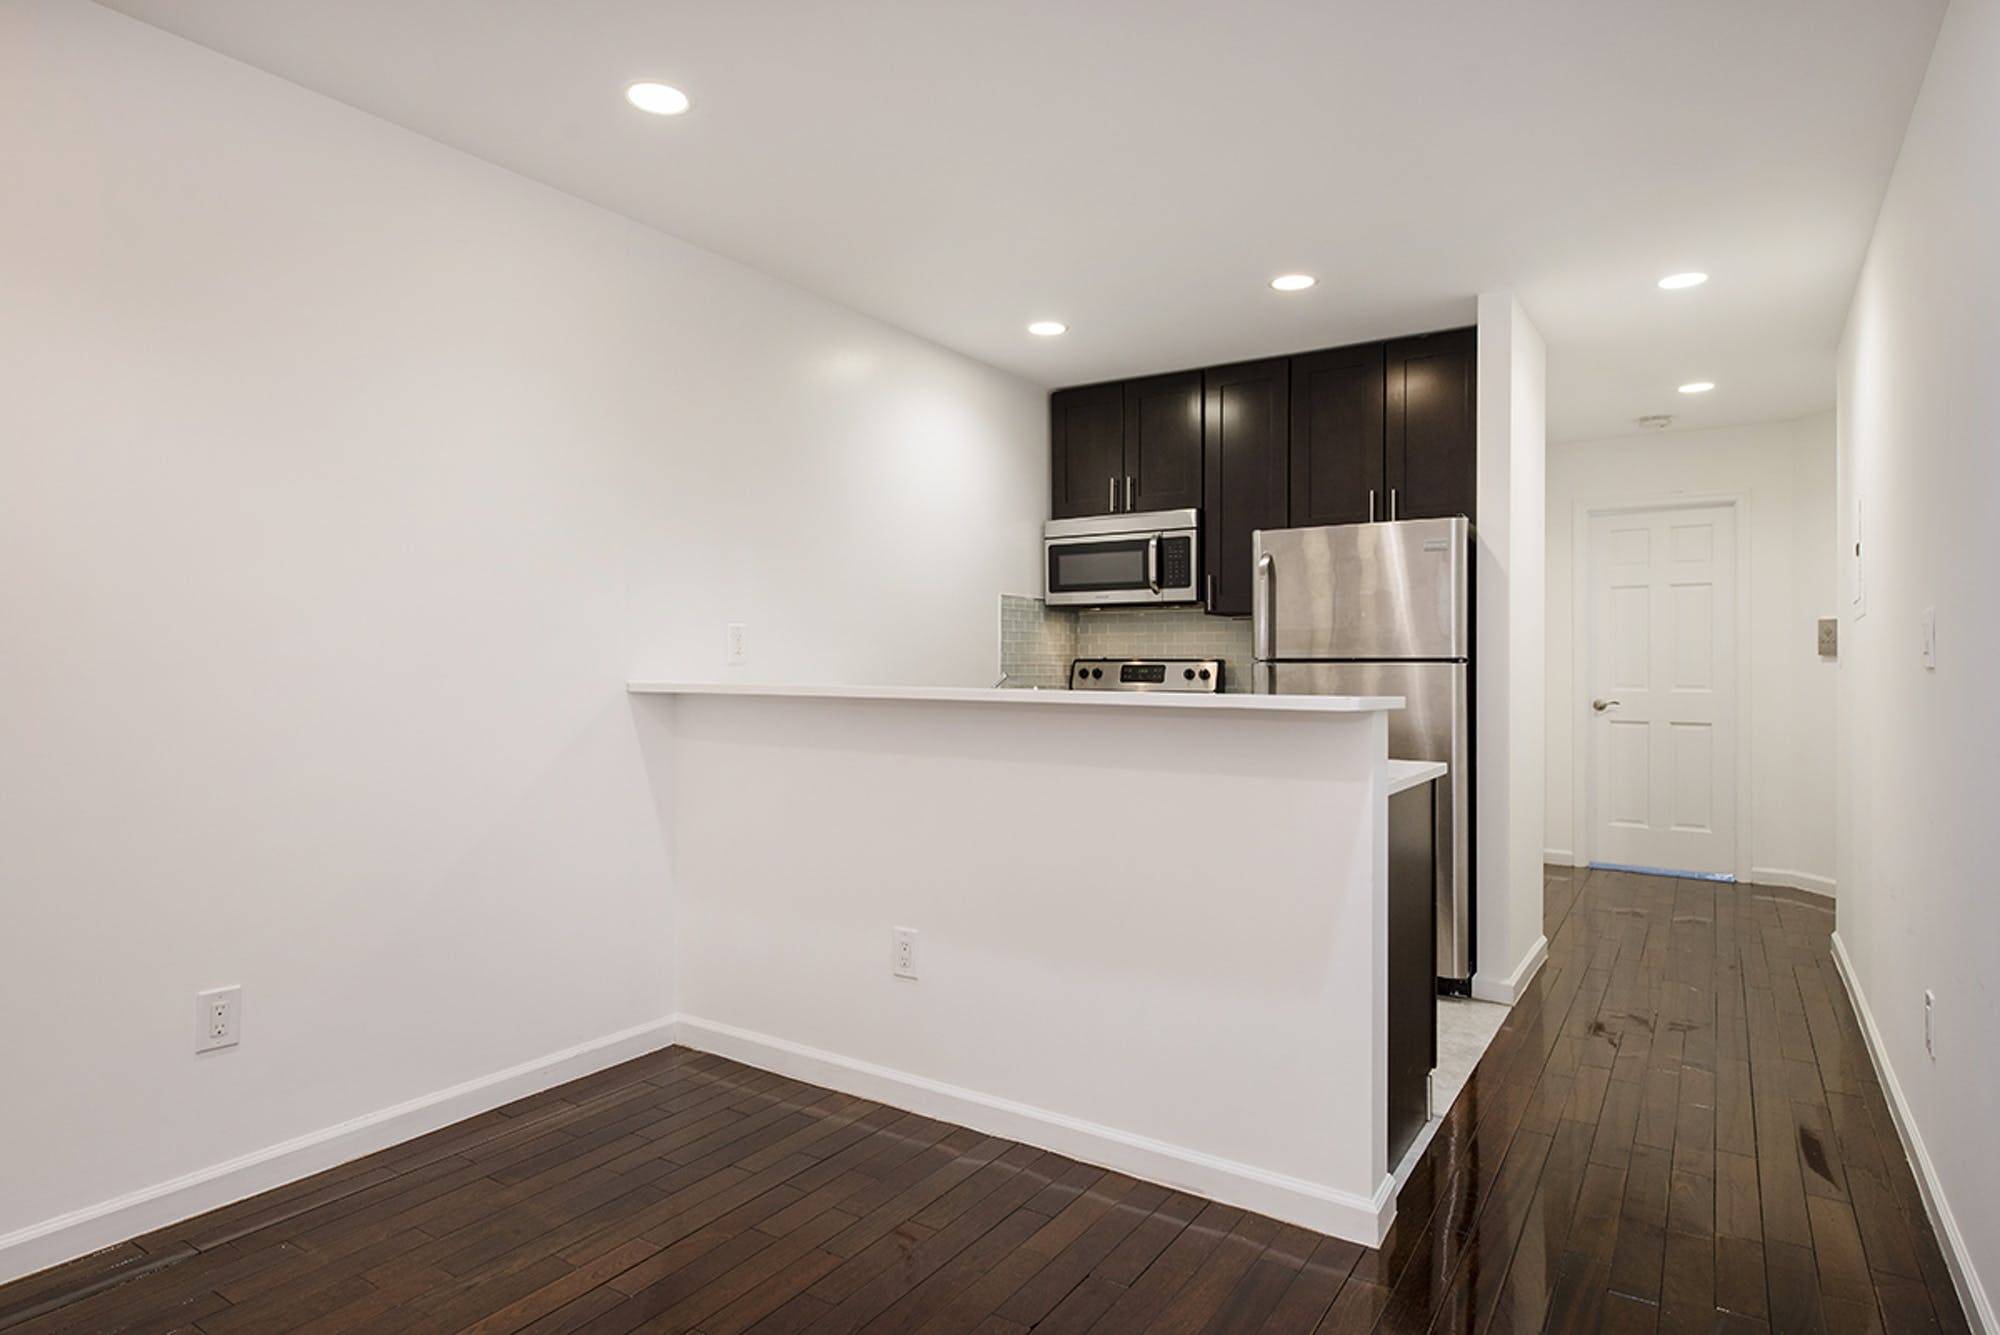 Available 2 Bedroom, 1 Bathroom Concessions 1 Month Free 2842 net, 3100 gross Apartment Features High Ceilings Oversized Windows Hardwood Floors Stainless Steel appliances including Dishwasher Marble Bathrooms Heat and ...